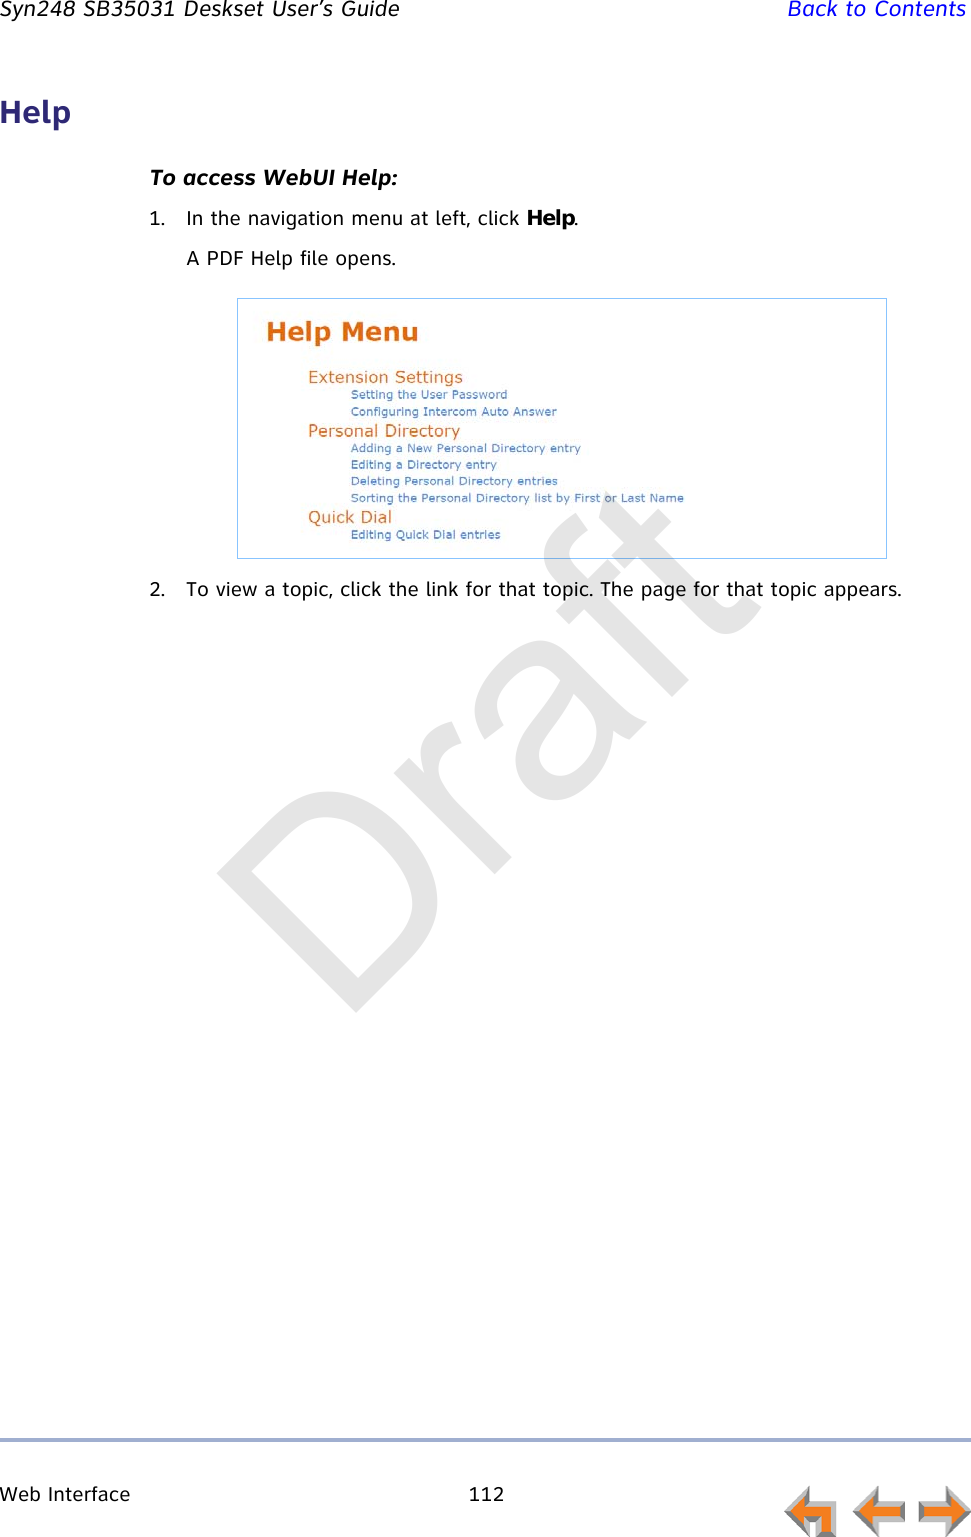 Web Interface 112         Syn248 SB35031 Deskset User’s Guide Back to ContentsHelpTo access WebUI Help:1. In the navigation menu at left, click Help.A PDF Help file opens.2. To view a topic, click the link for that topic. The page for that topic appears.Draft